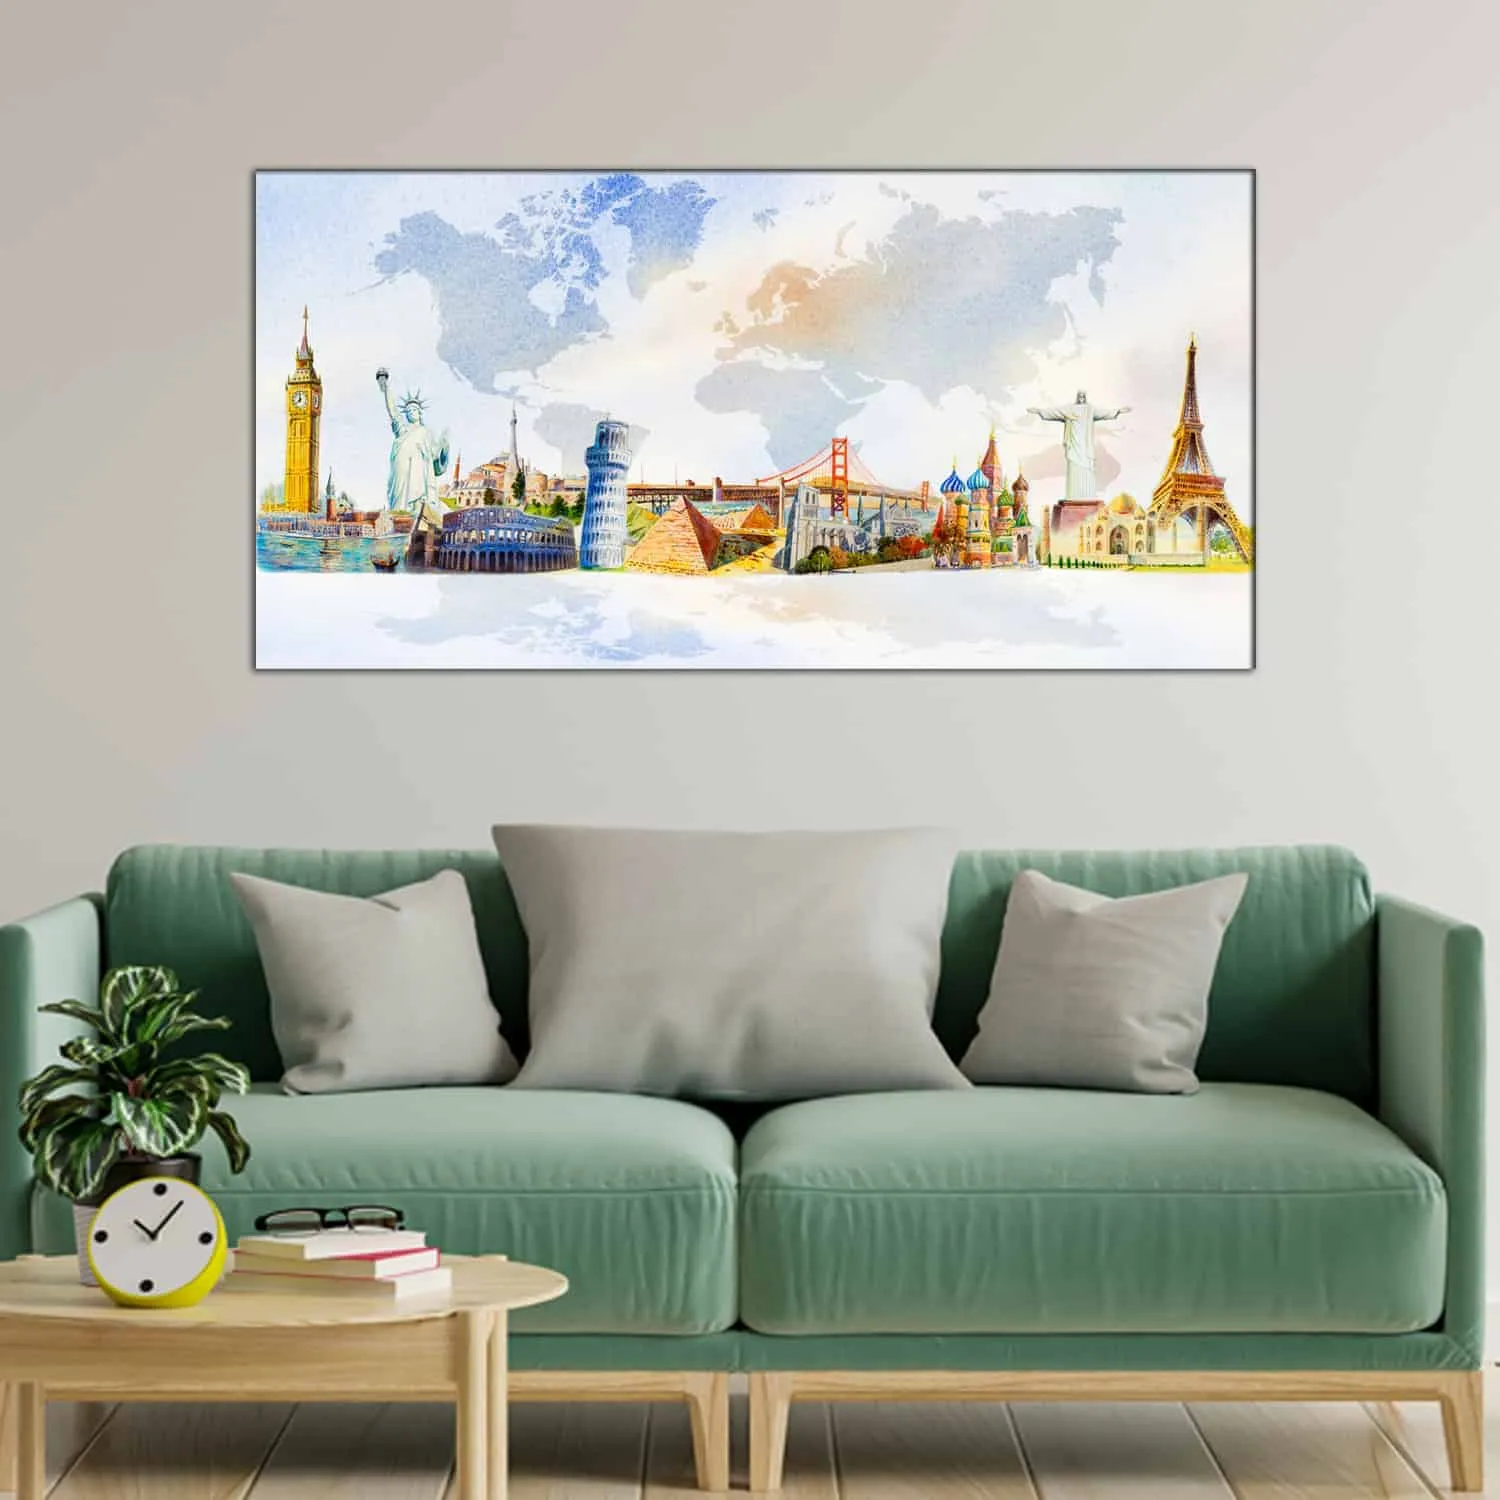 A graceful display of wall art painting in a living room.